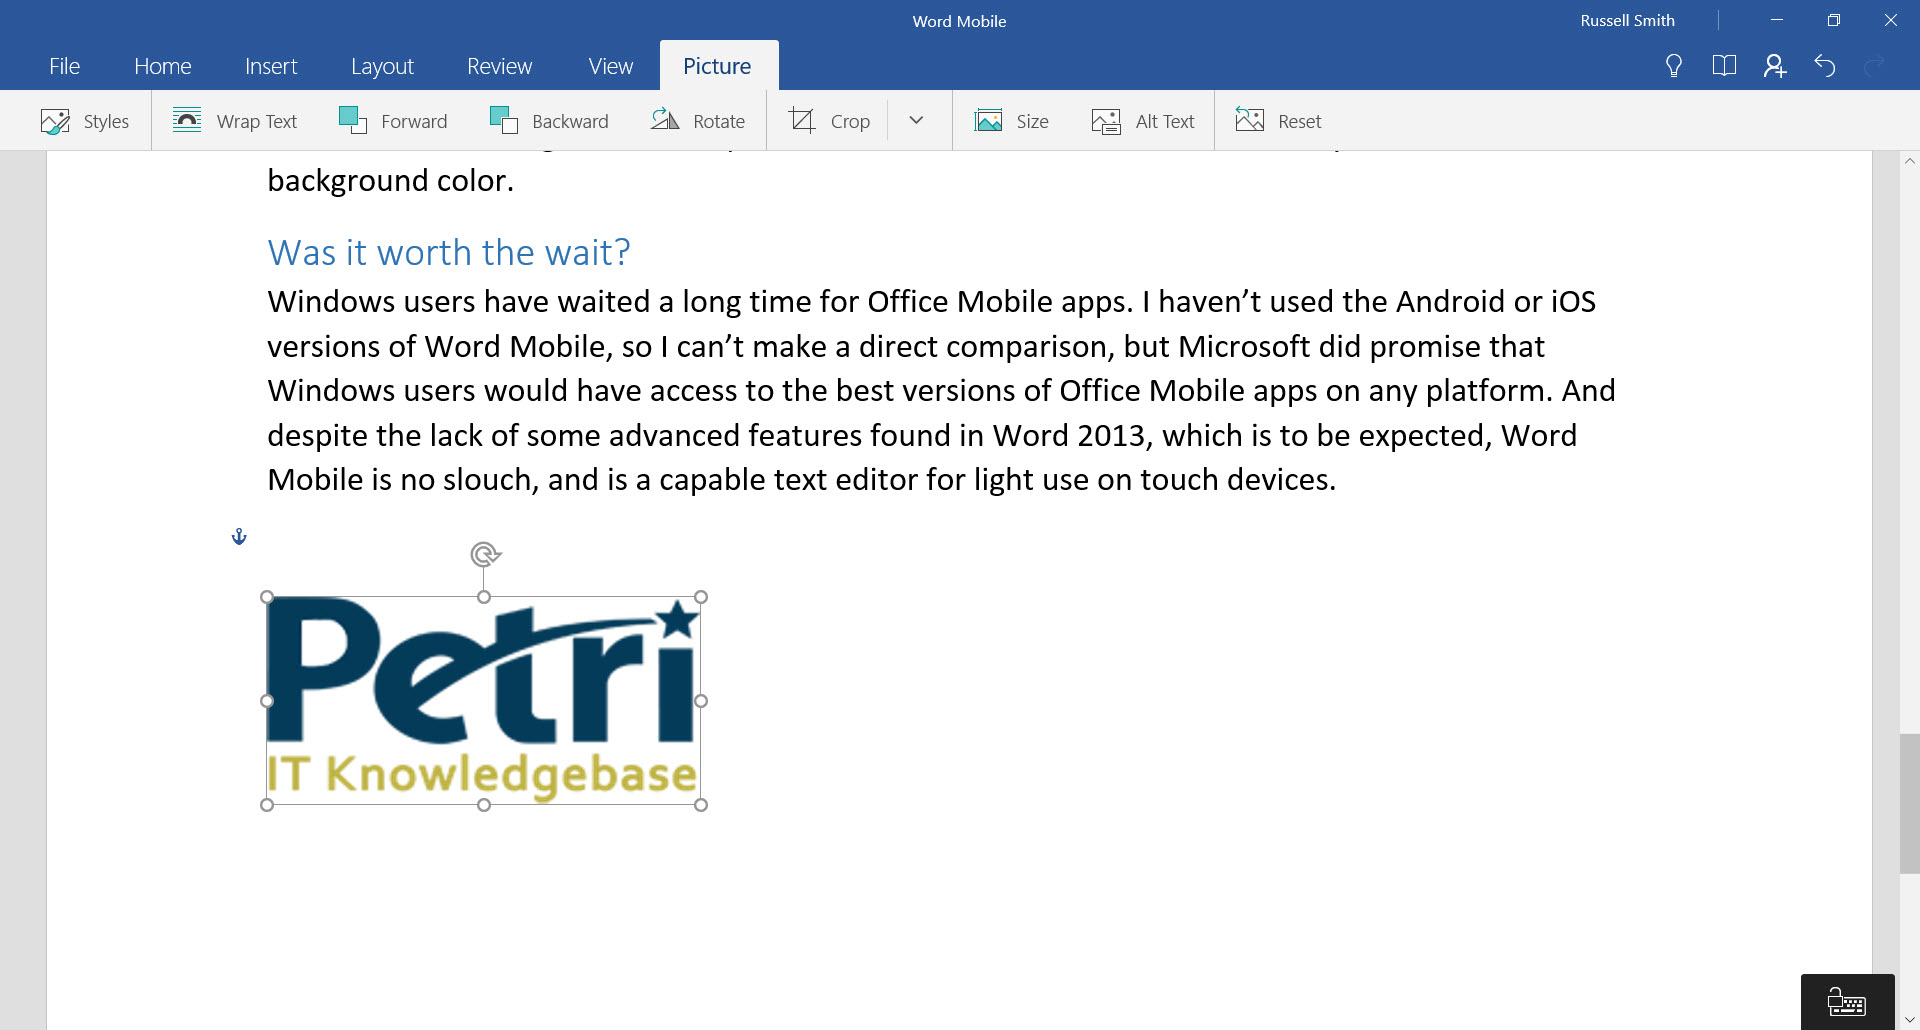 Editing images in Word Mobile (Image Credit: Russell Smith)